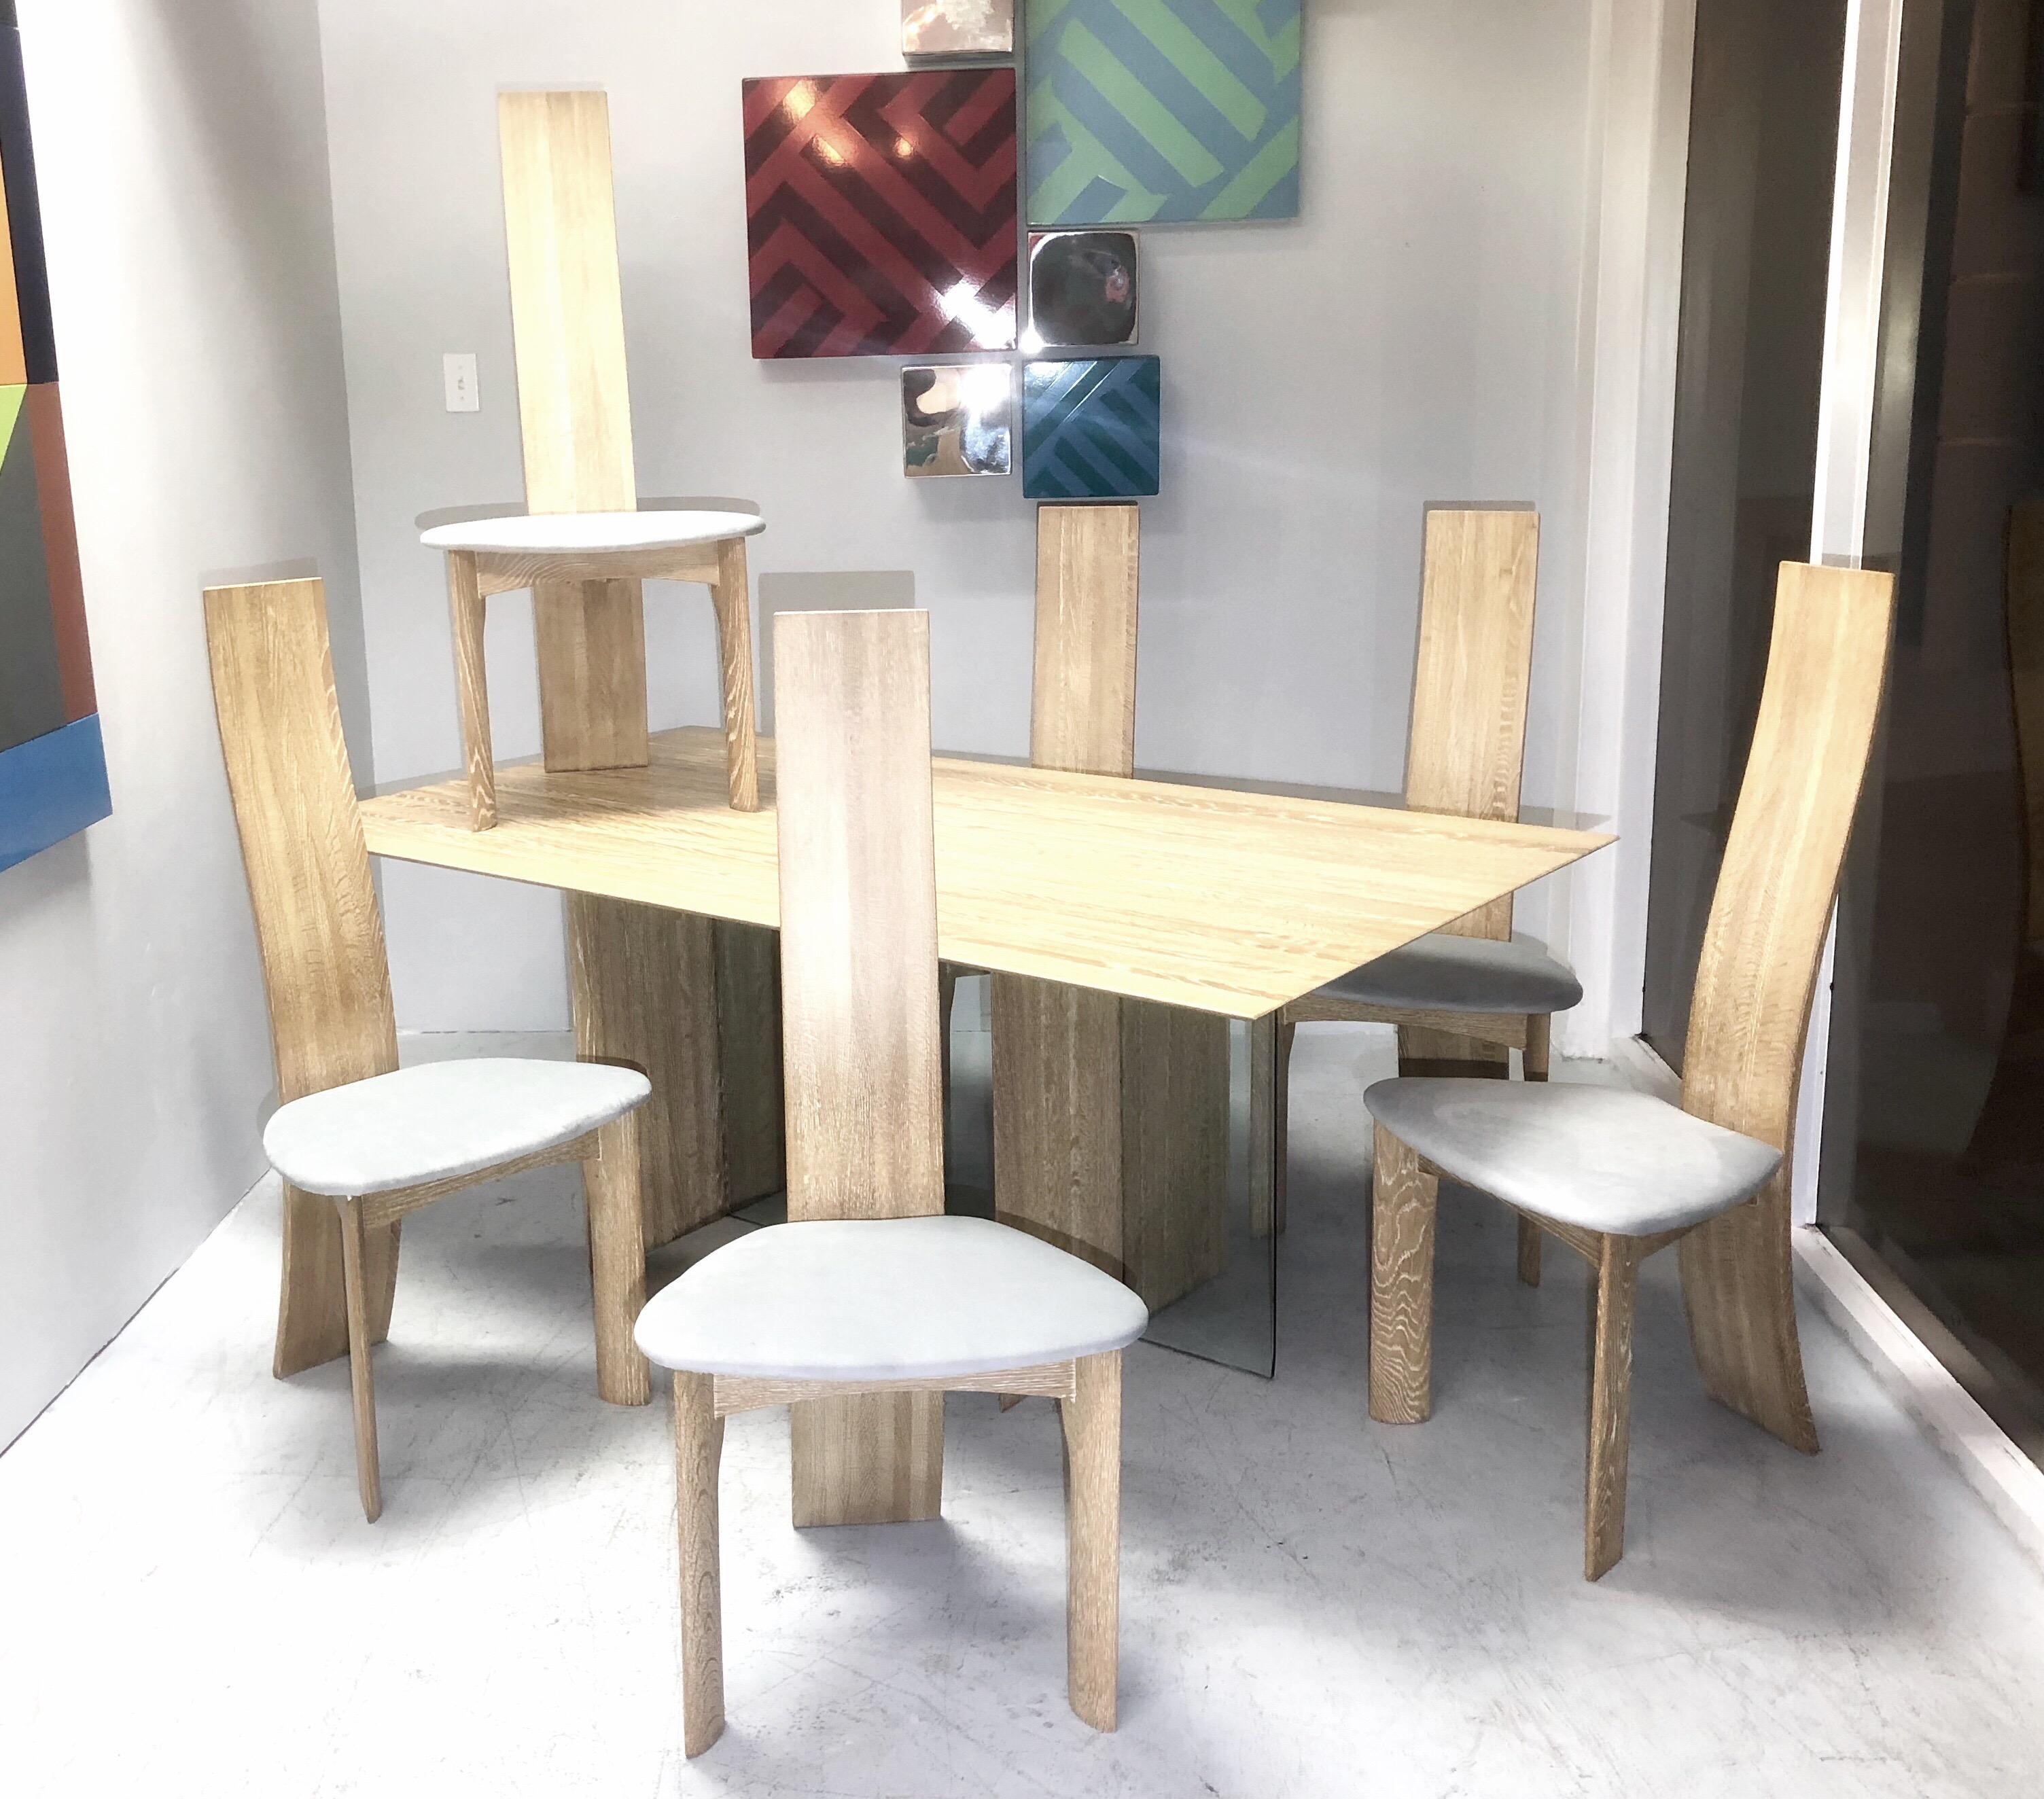 A modern Danish dining set. A solid oak table with a glass inset element on the base. 6 sculptural chairs also of solid oak. The chairs tall backs are slender and end being extremely thin at the top. The look is very sculptural and Minimalist with a